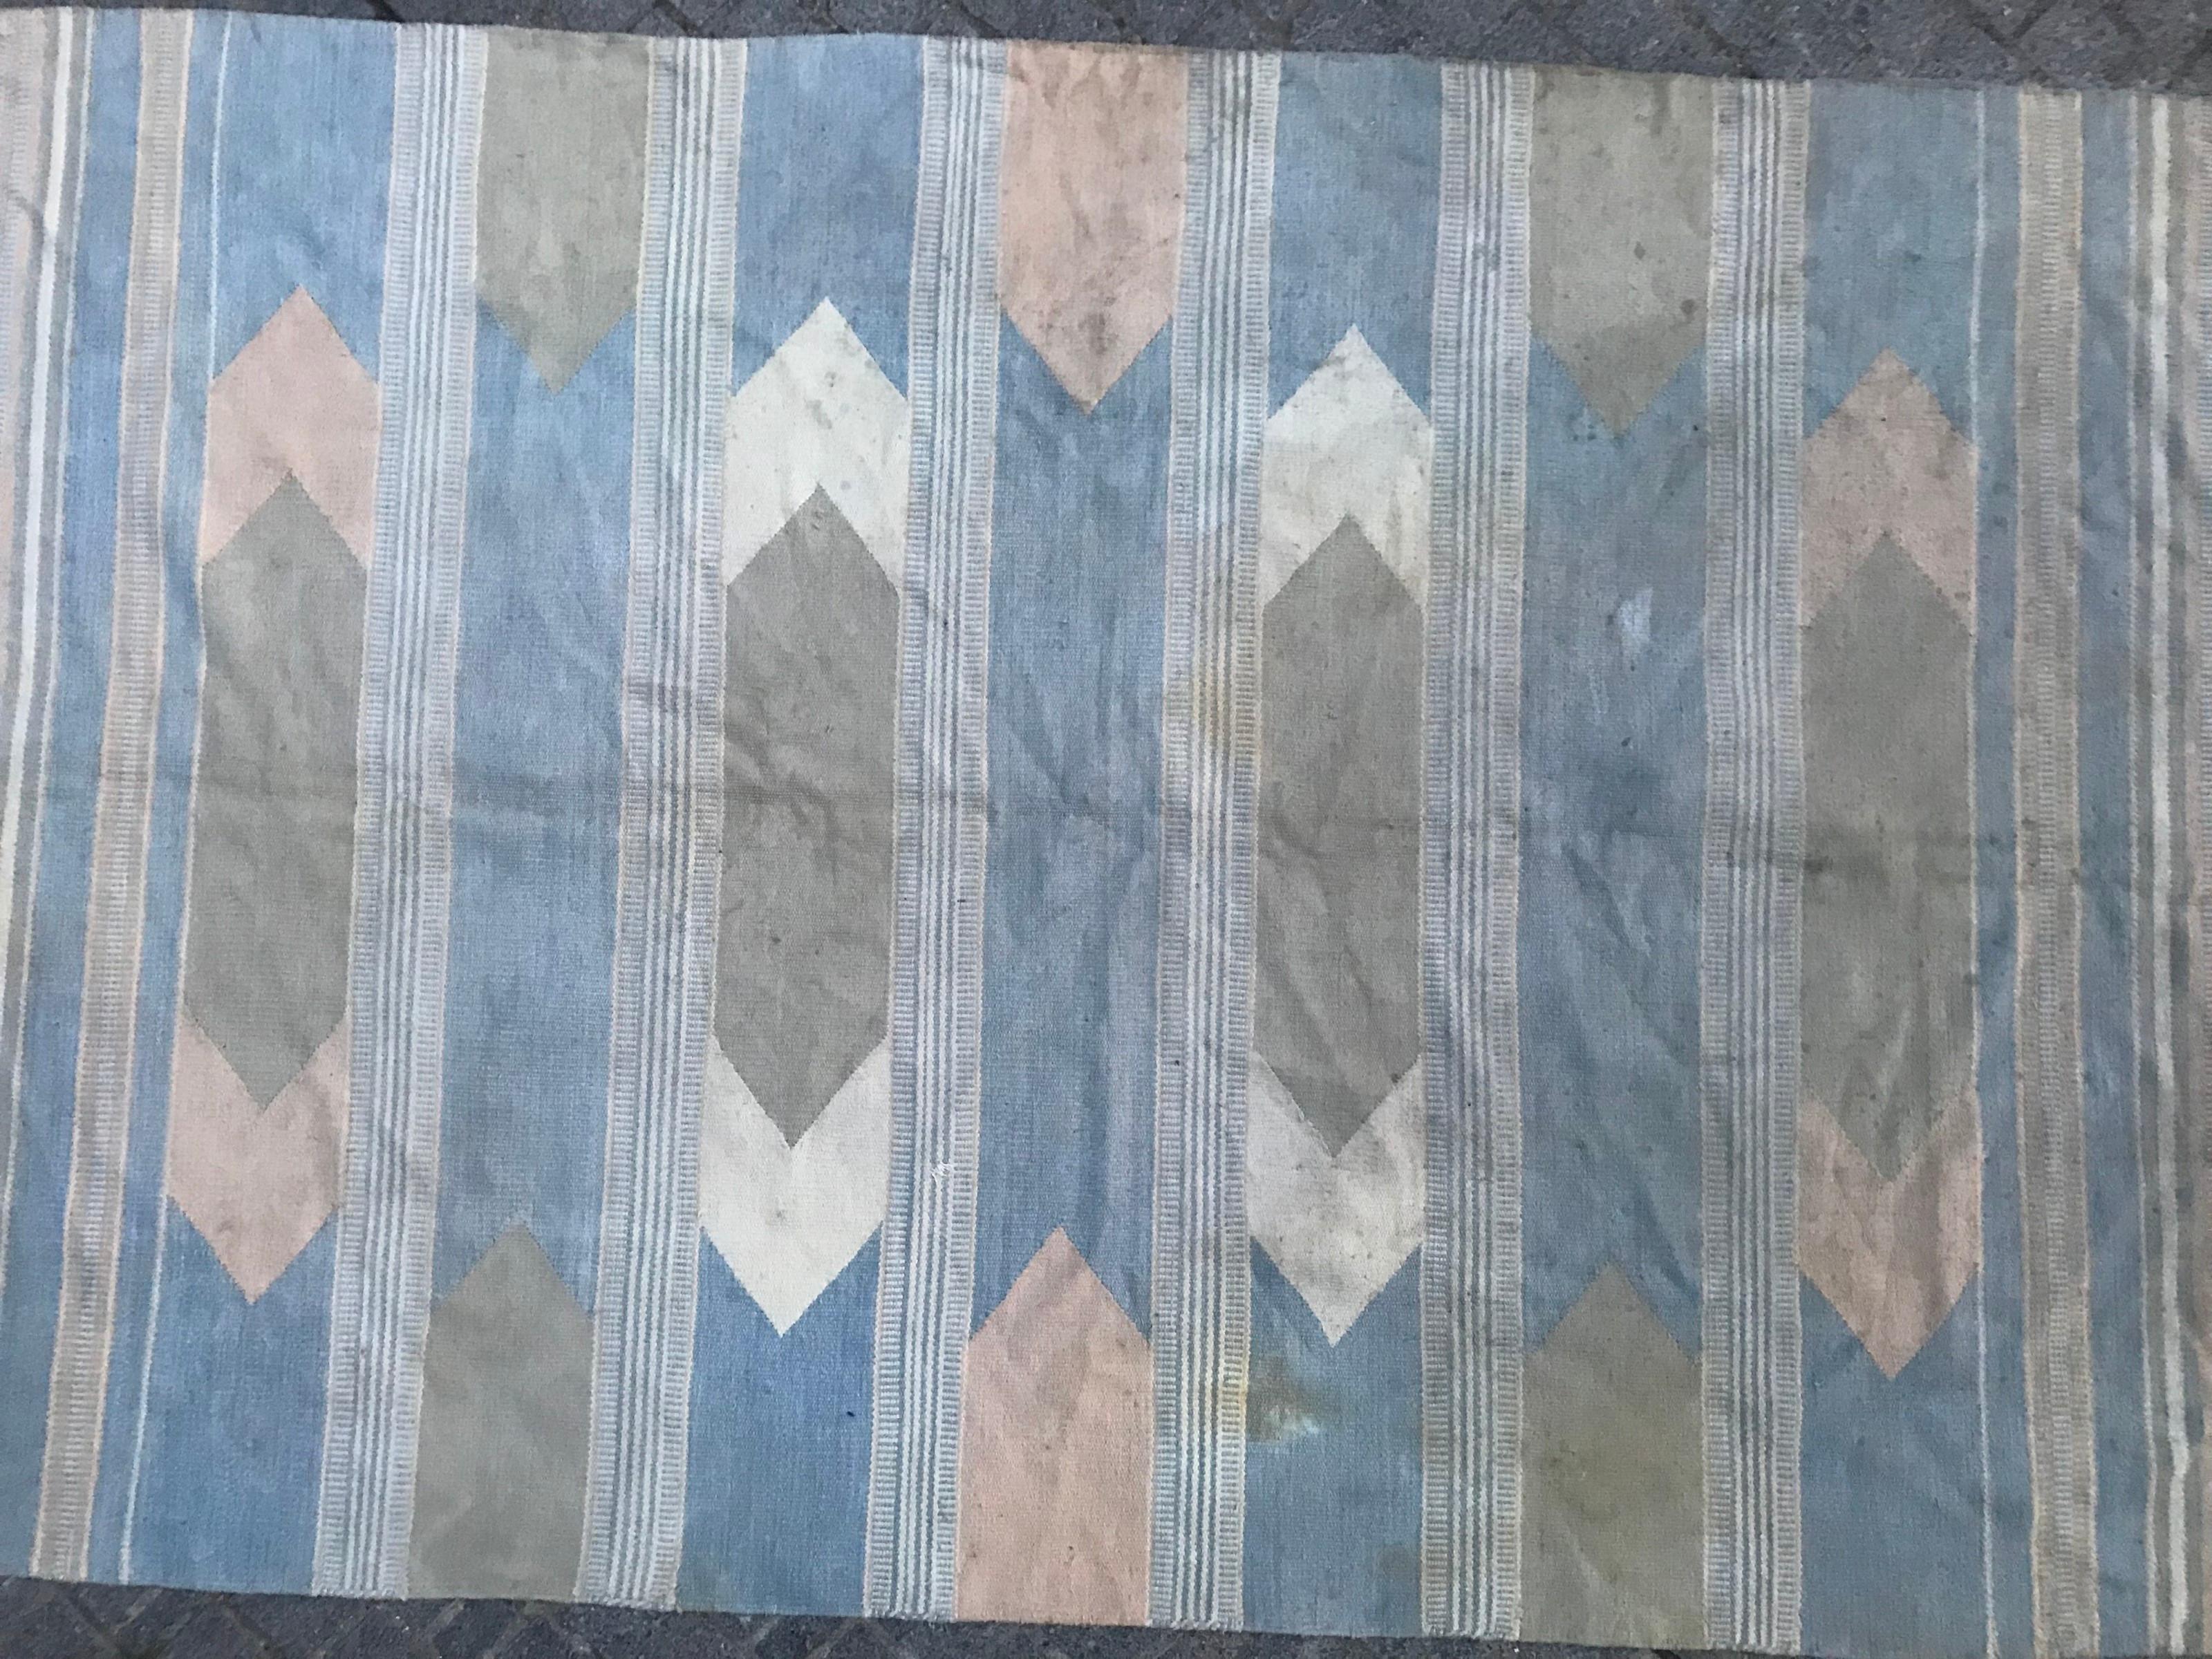 Nice 20th century Indian Durhi flat-woven rug with beautiful geometrical design and light colors with blue and beige, entirely handwoven with cotton on cotton.